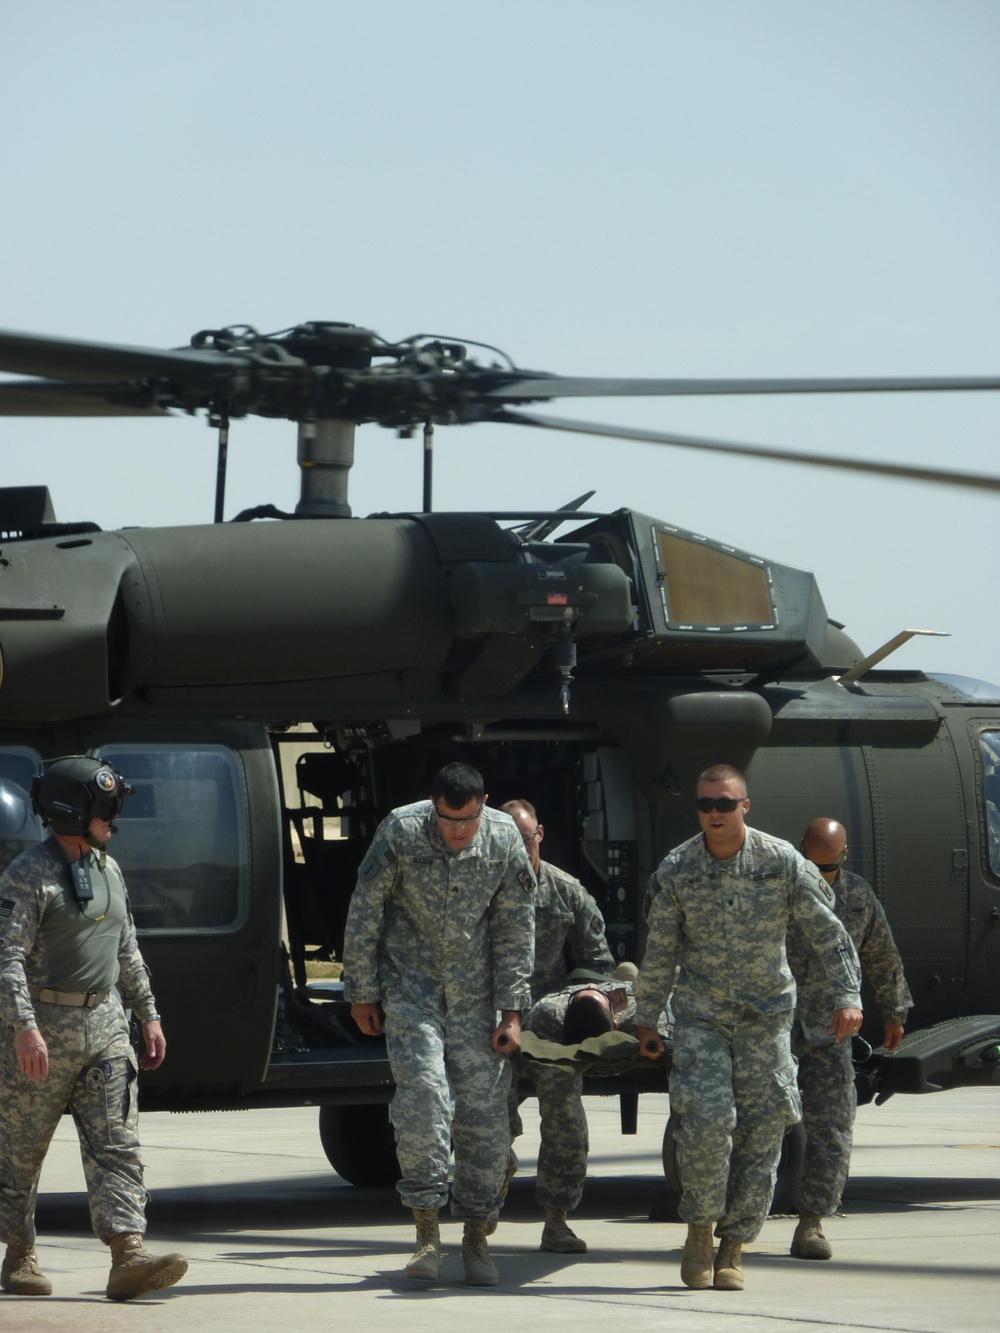 512th personal security detachment trains with MEDEVAC